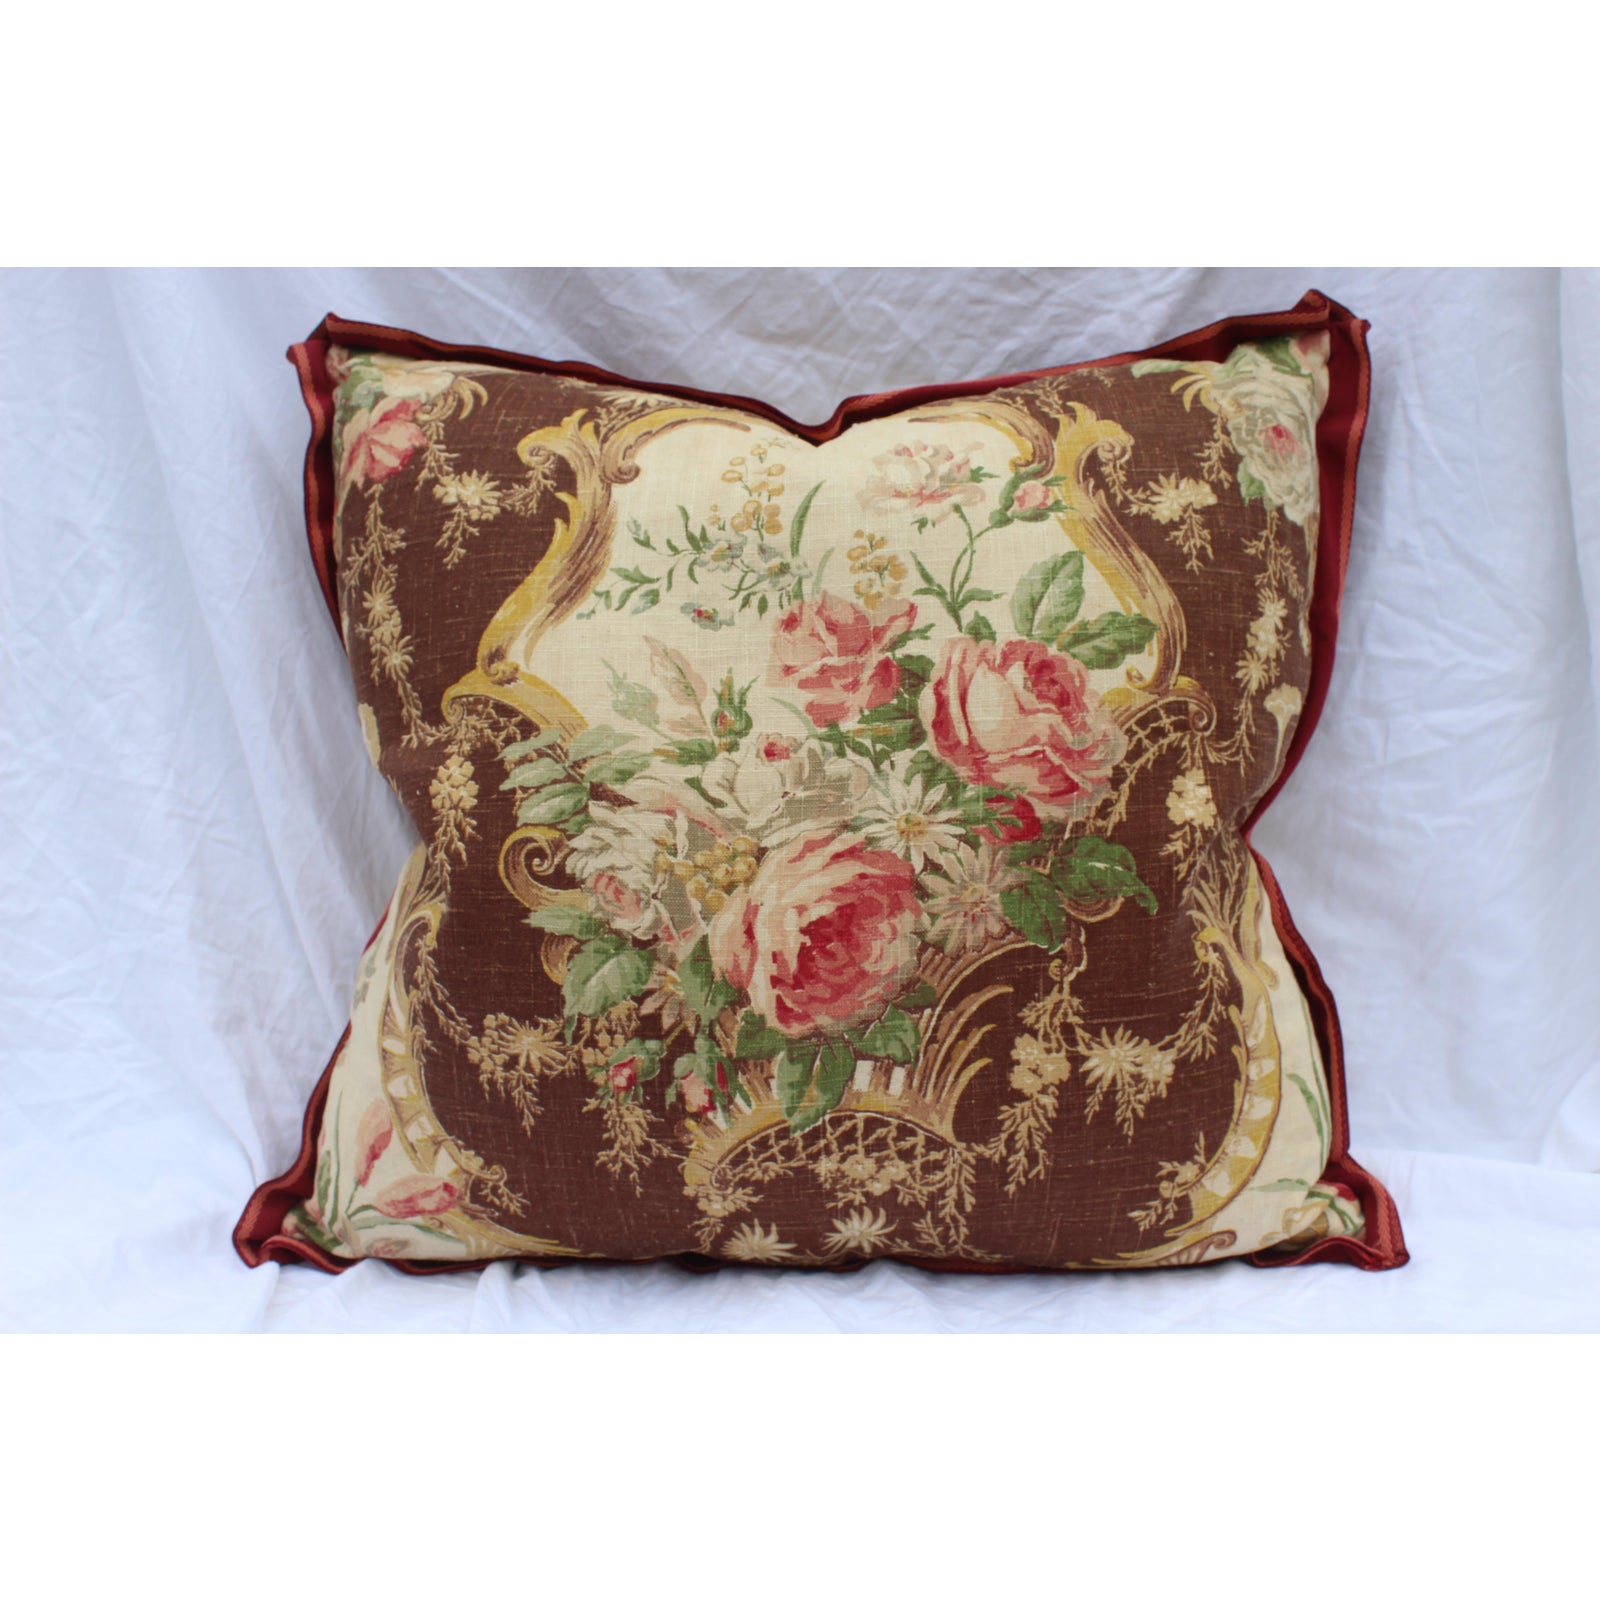 english-traditional-floral-printed-linen-down-pillow-2975